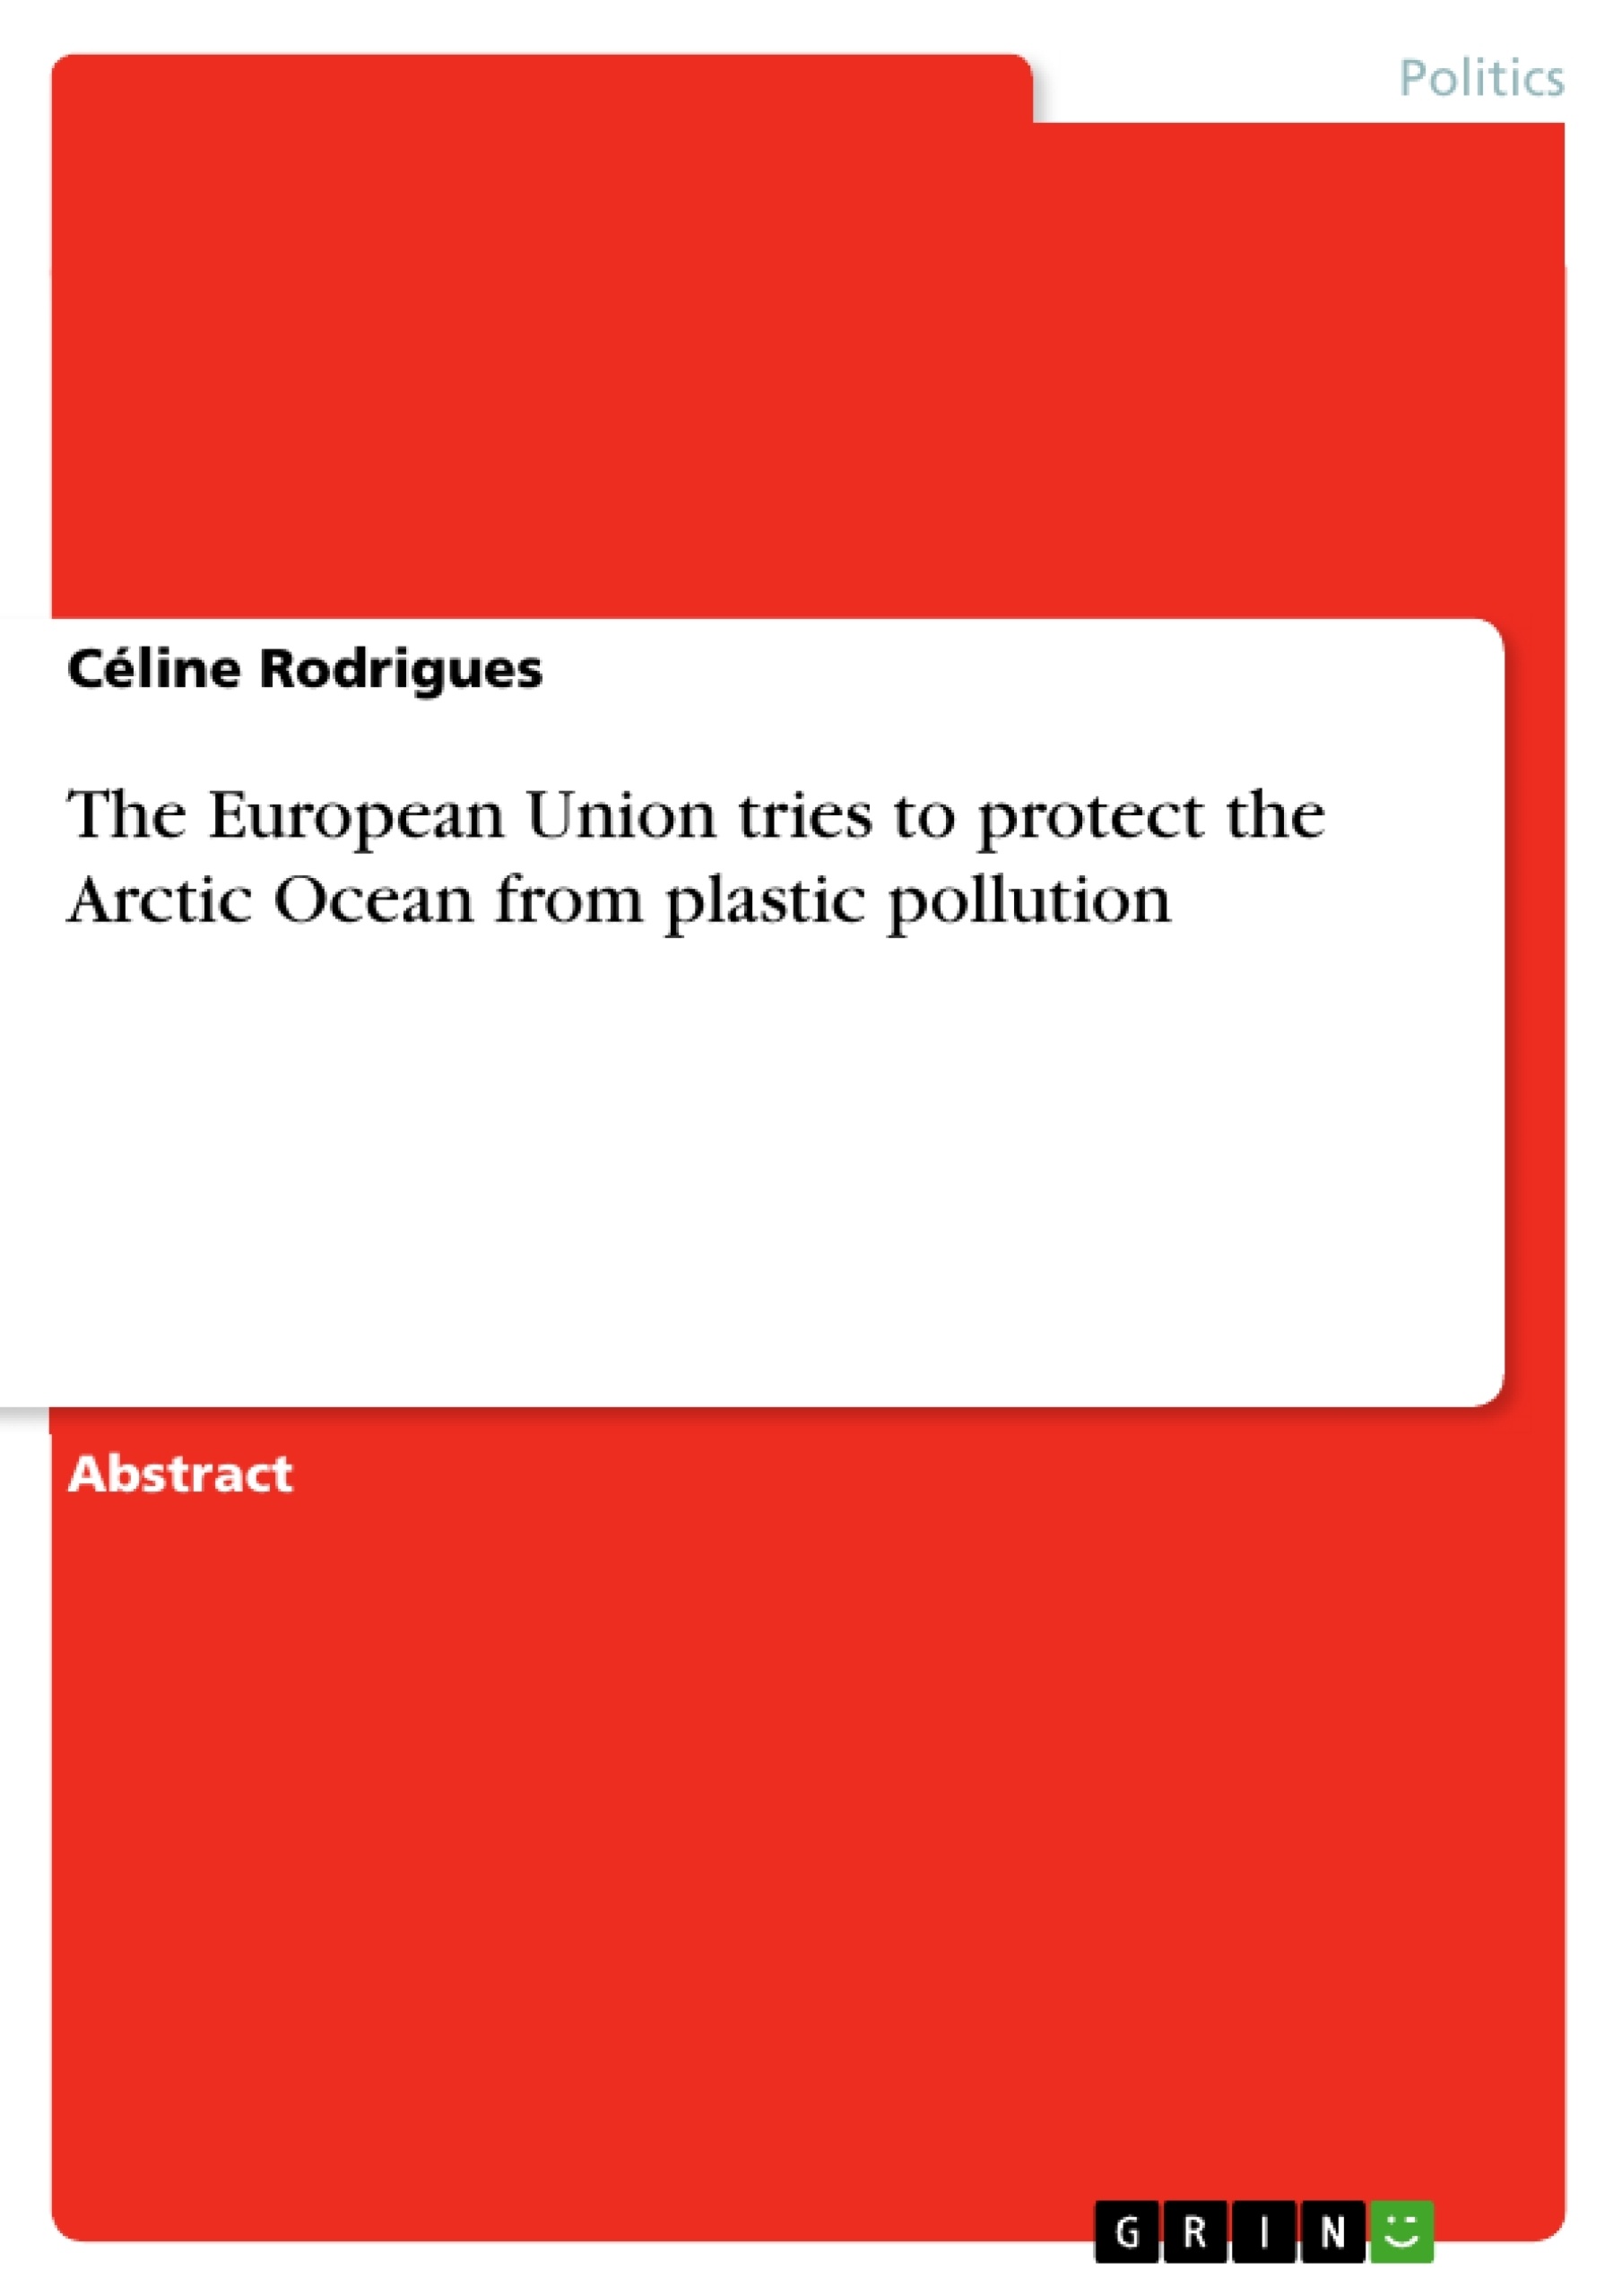 Title: The European Union tries to protect the Arctic Ocean from plastic pollution